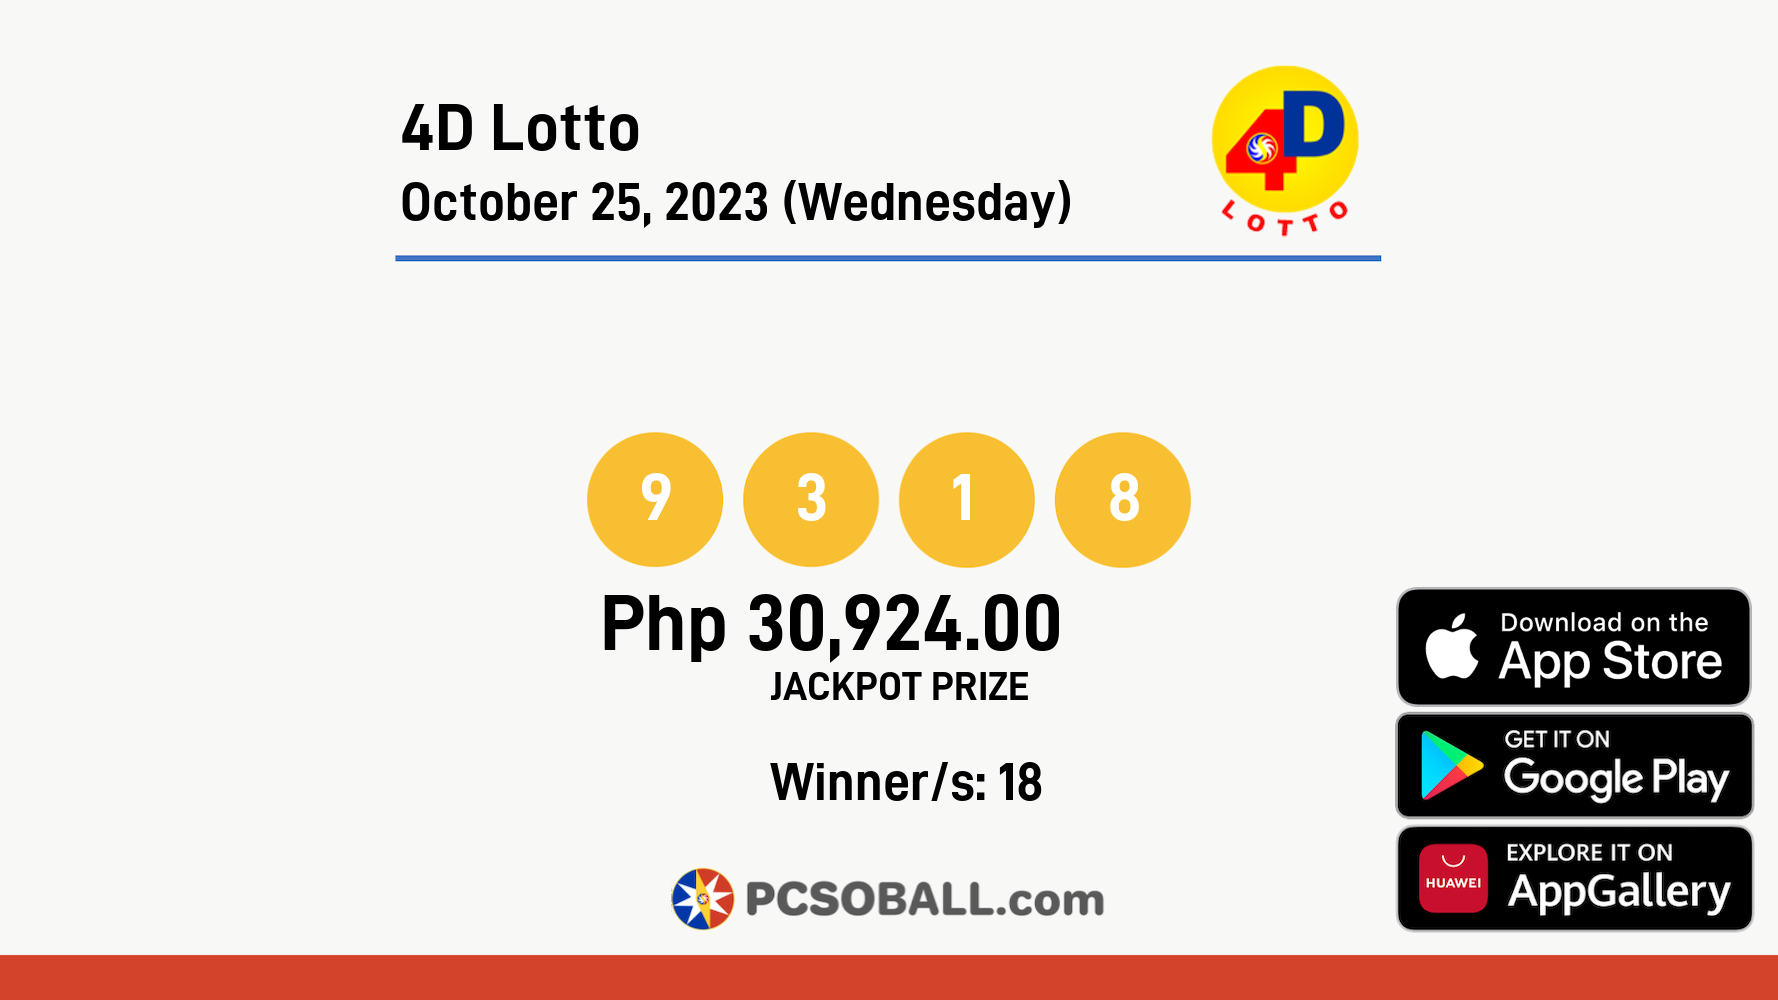 4D Lotto October 25, 2023 (Wednesday) Result